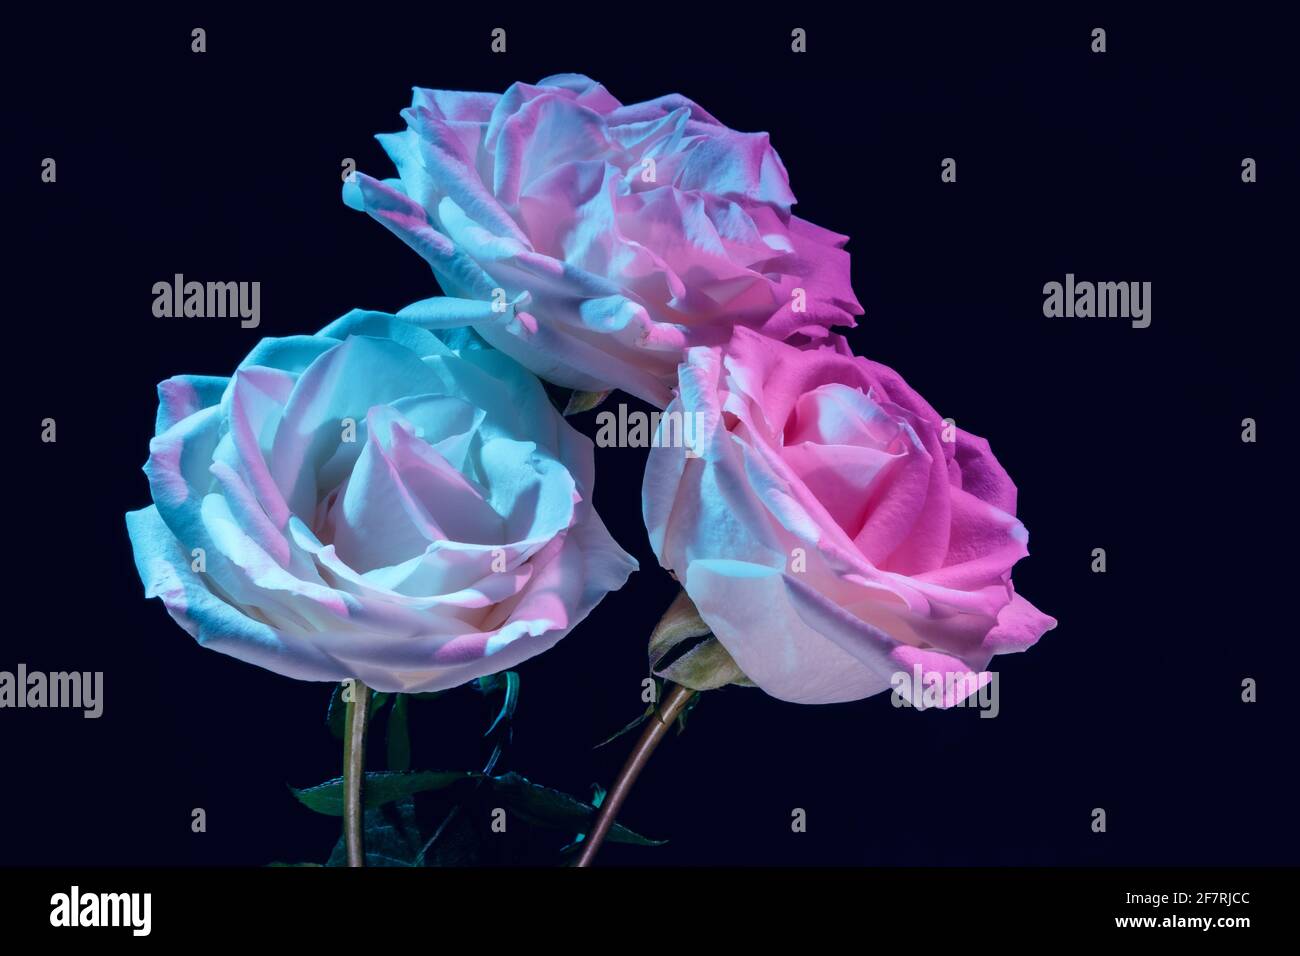 Three white roses in colorful lighting Stock Photo